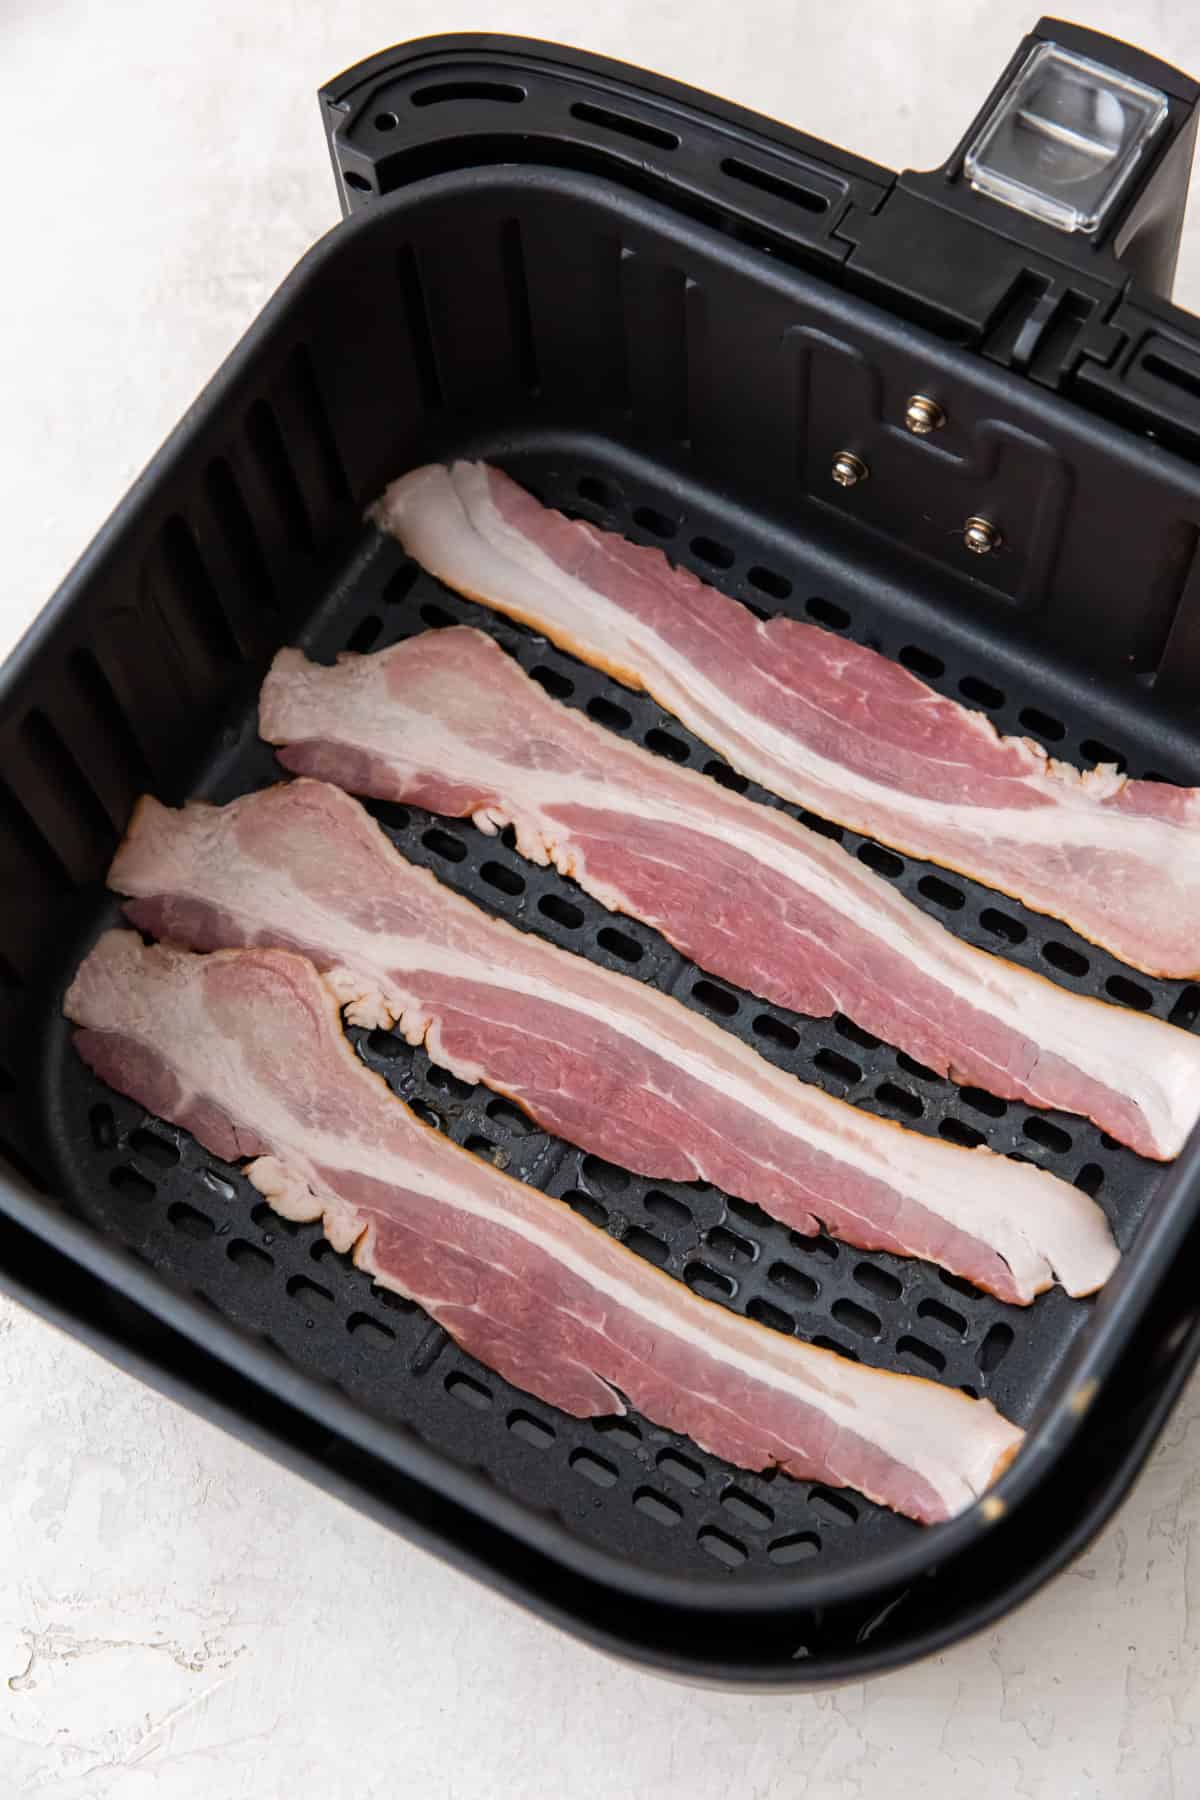 raw rashers in convection oven basket.